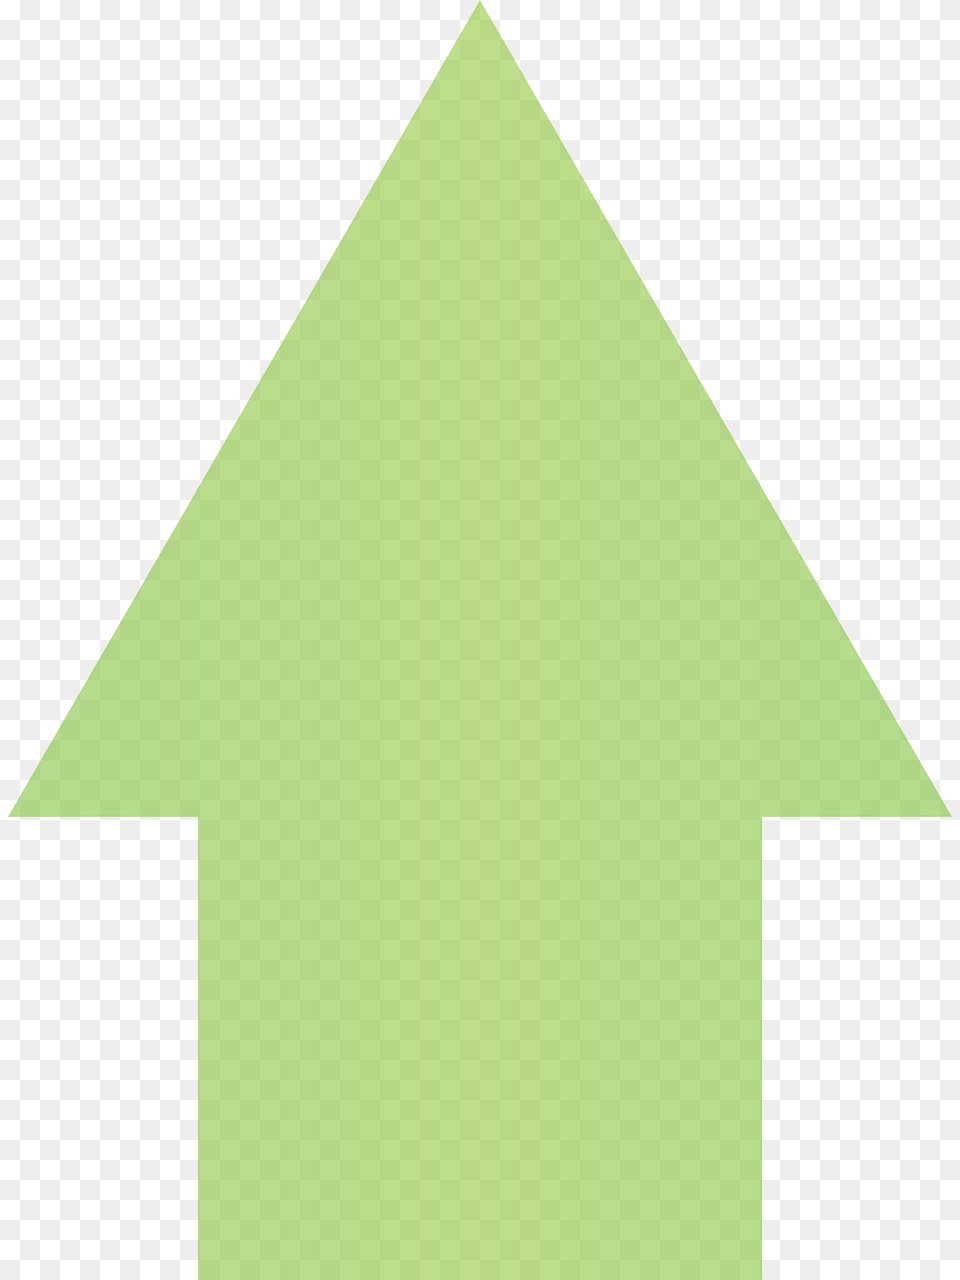 Up Upload Arrow Picture Green Arrow Up Icon Background, Triangle Free Transparent Png